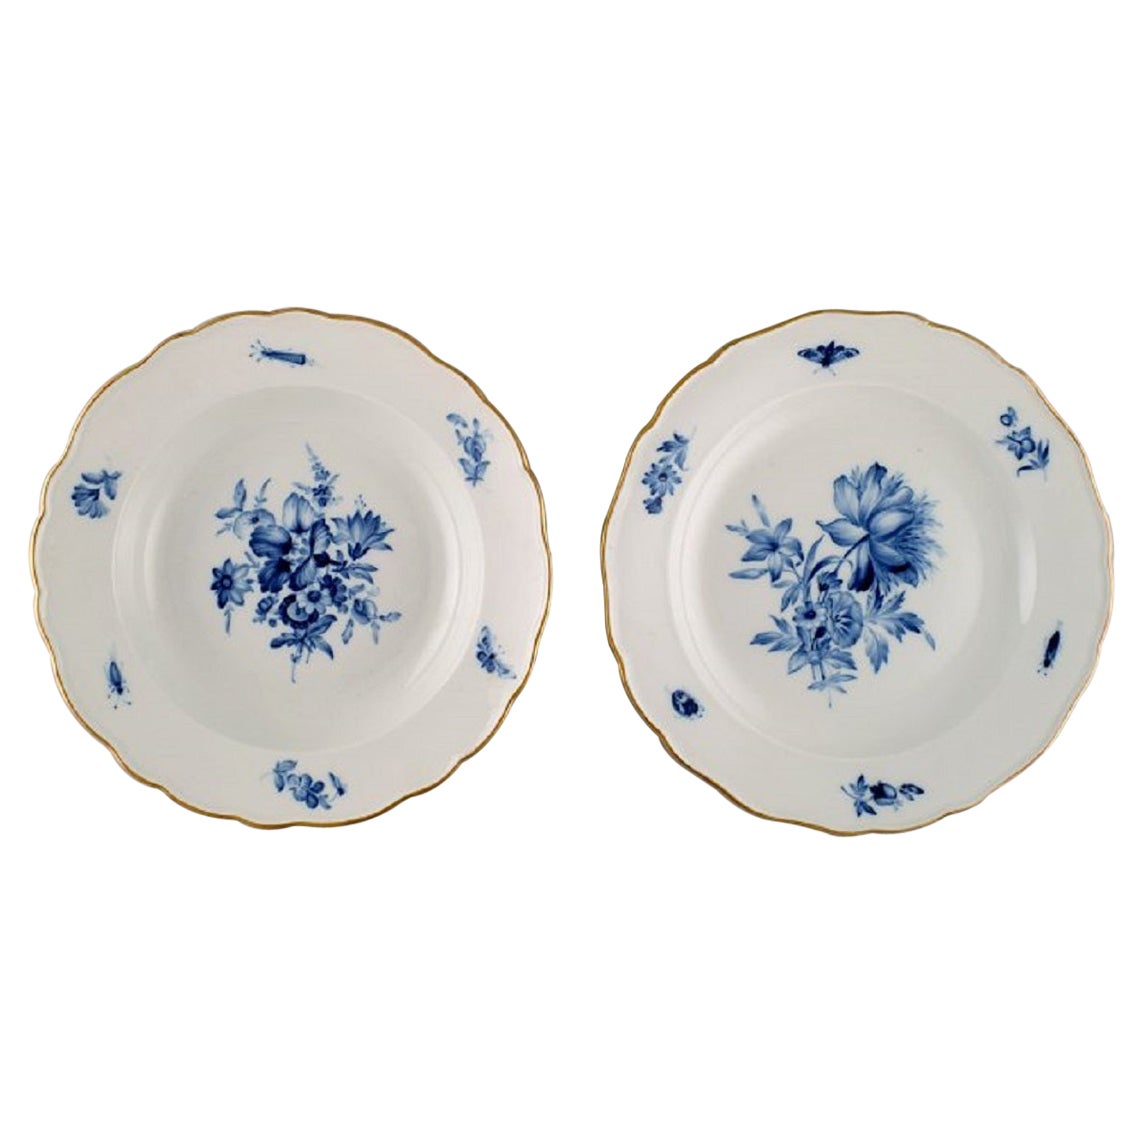 Two Antique Meissen Porcelain Plates with Hand-Painted Flowers and Gold Edge For Sale